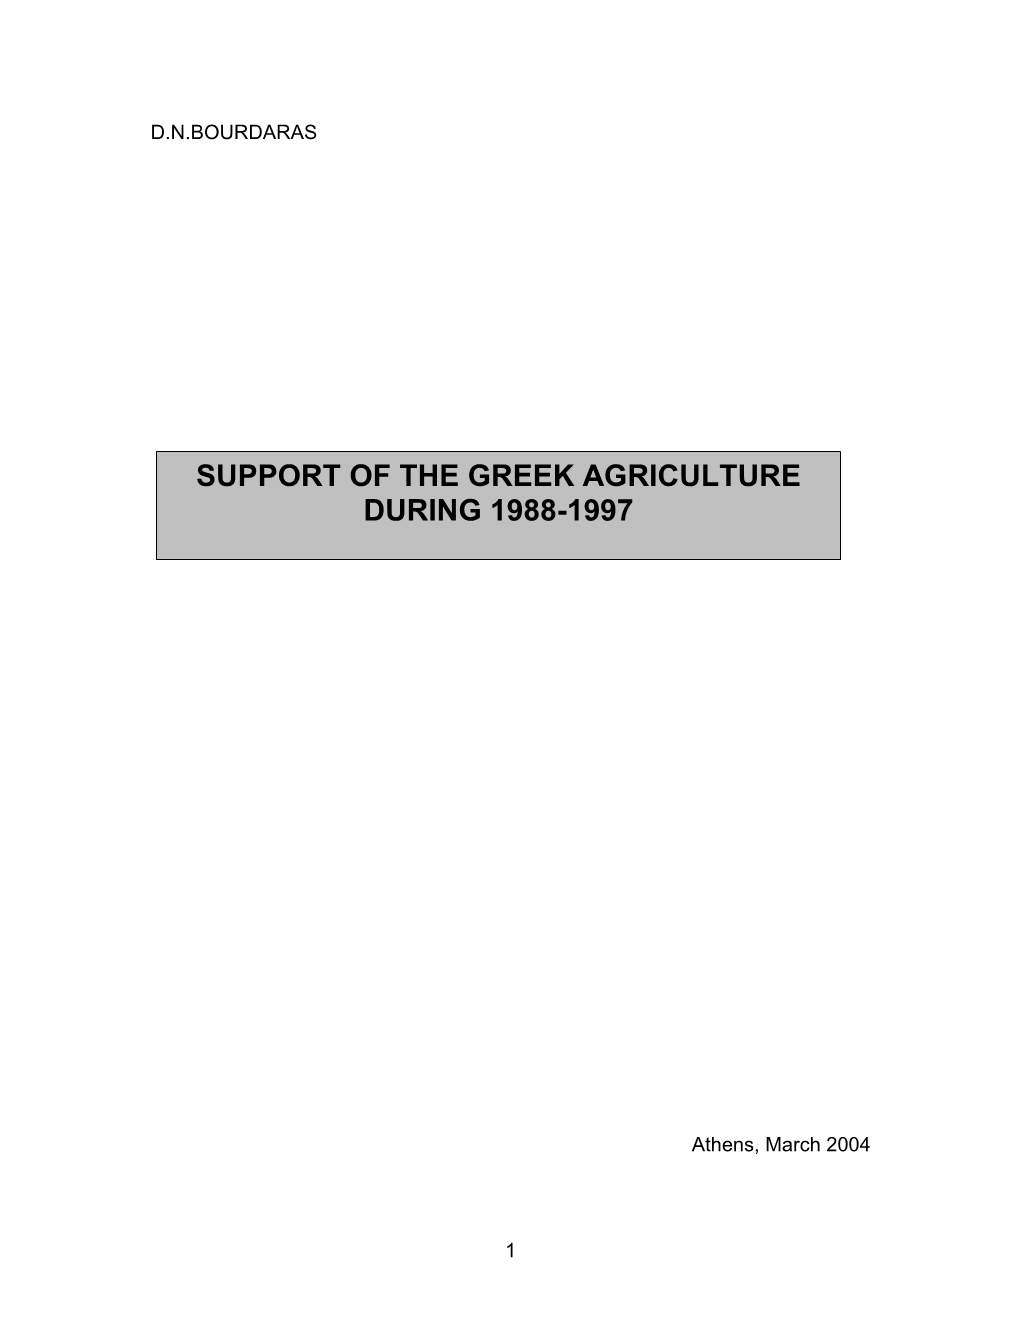 Support of the Greek Agriculture During 1988-1997